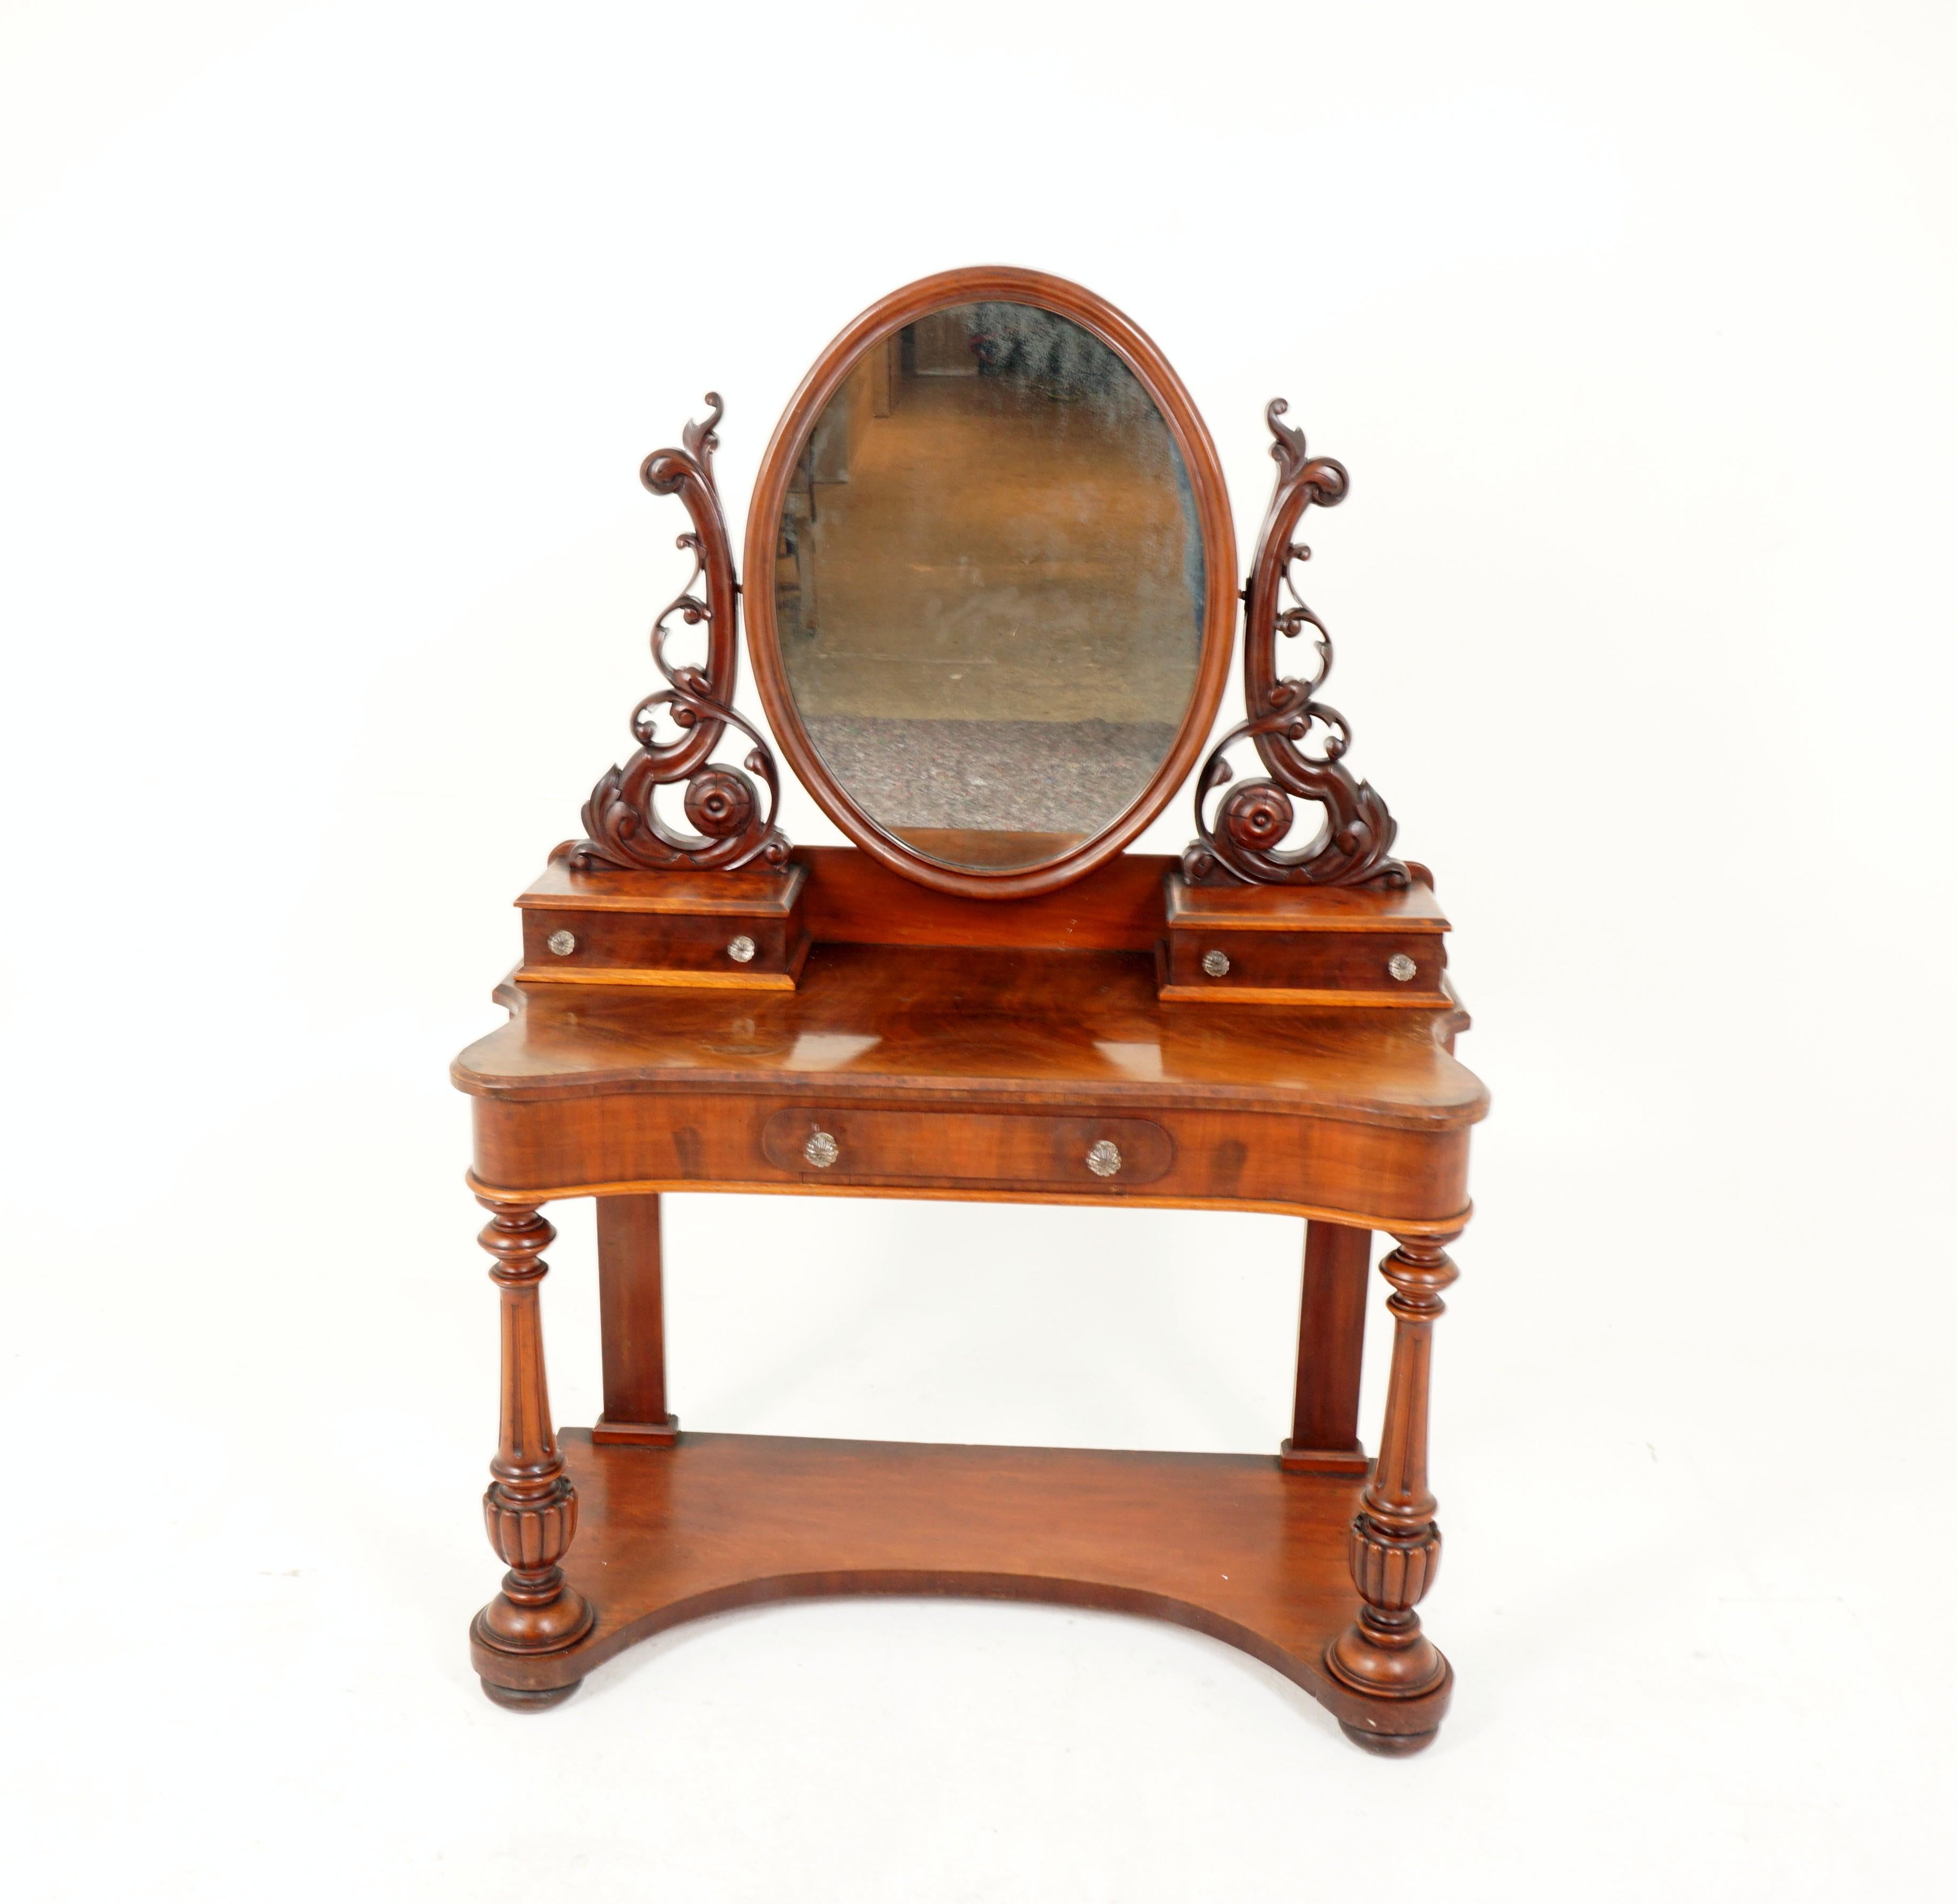 Antique Victorian mahogany duchess vanity dresser, Scotland 1870, H231

Scotland 1870
Solid mahogany 
Original finish
Oval mirror
Pair of jewelry drawer boxes on top 
Inverted top
With undershelf 
With turned legs to the front 

Measures: 43 x 20 x